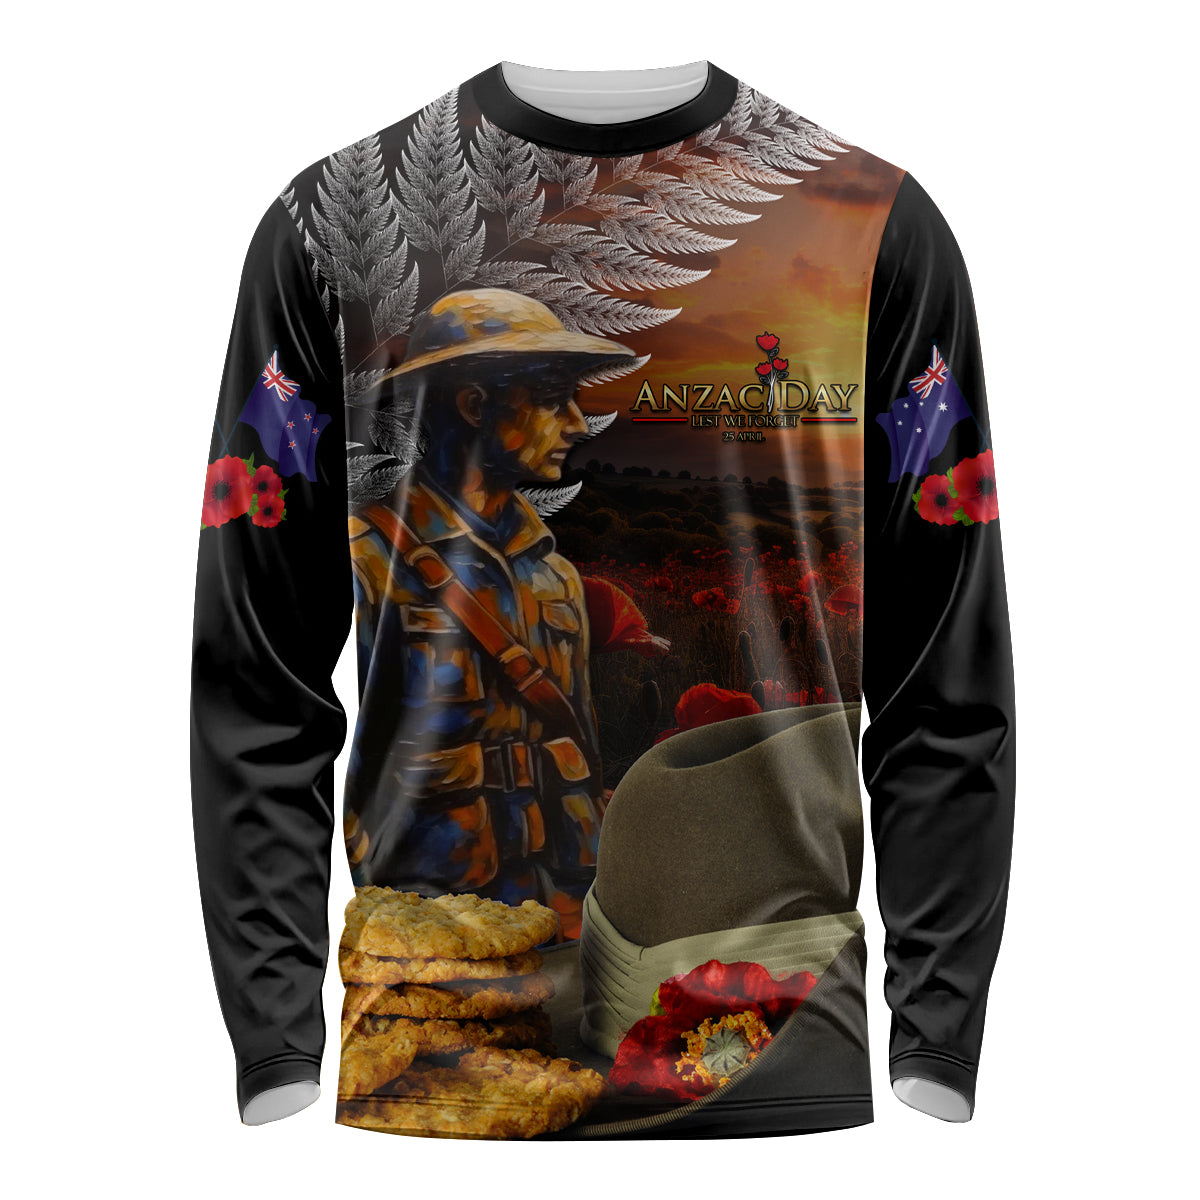 Slouch Hat and Biscuits ANZAC Long Sleeve Shirt with Soldier Silver Fern LT03 Unisex Black - Polynesian Pride